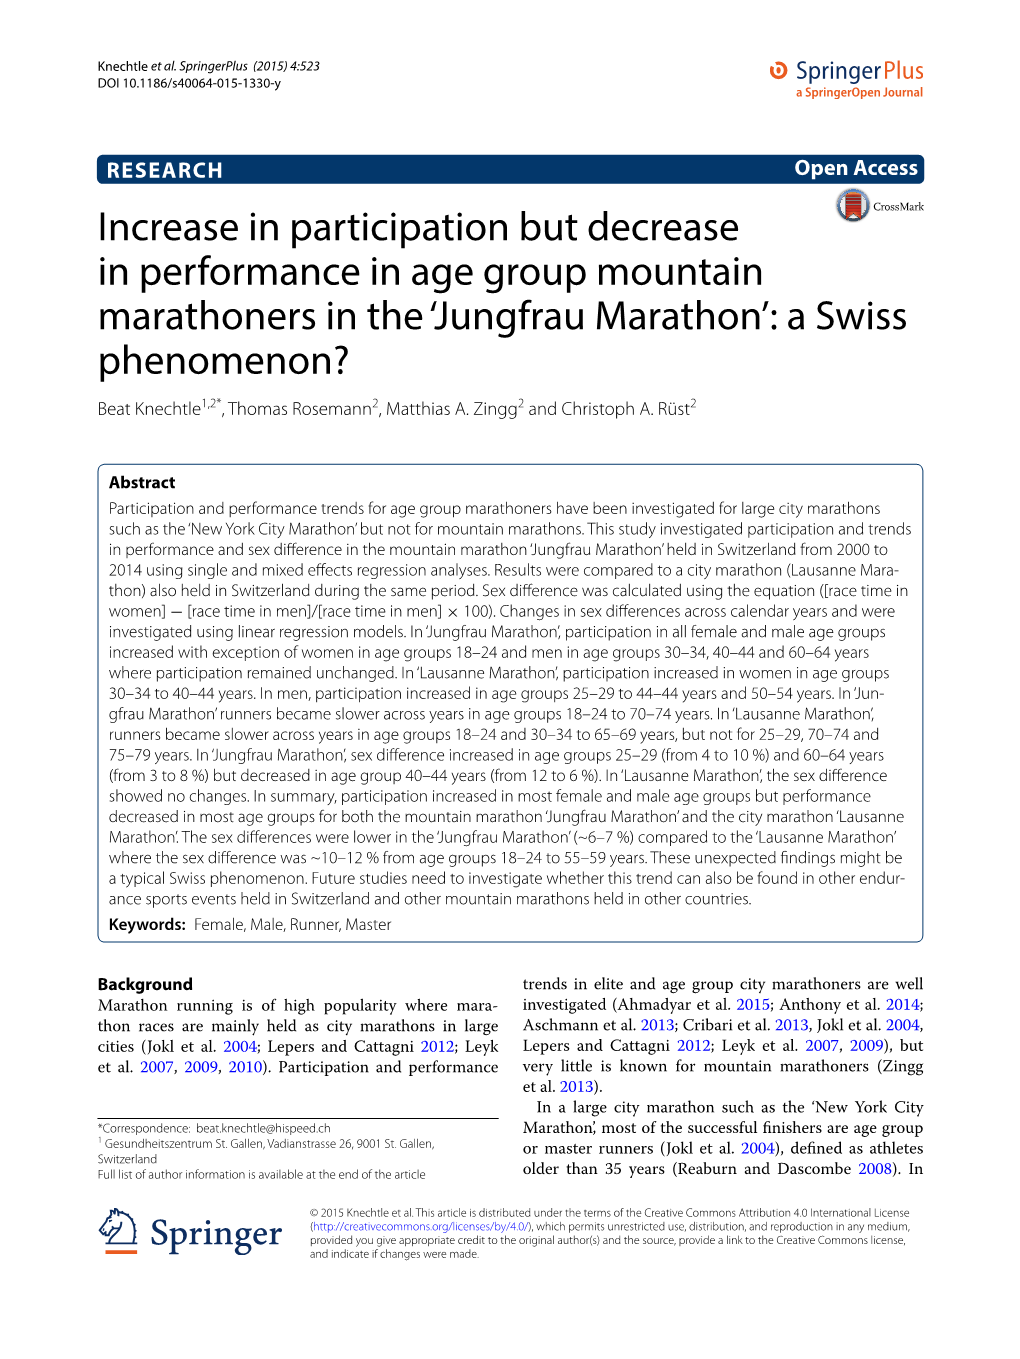 Increase in Participation but Decrease in Performance in Age Group